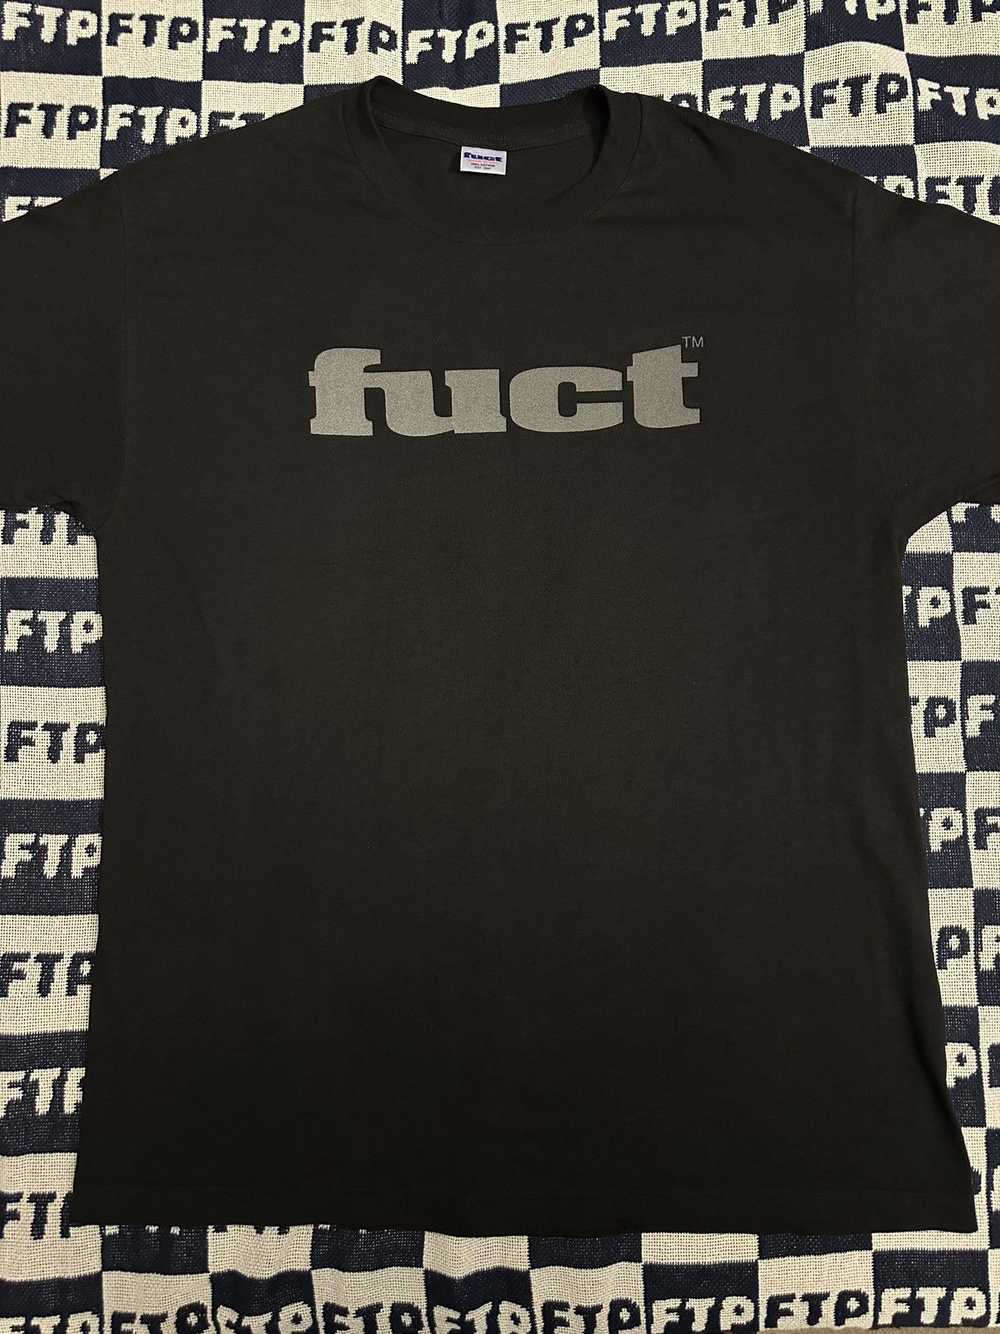 Fuck The Population FTP FUCT 3M TEE - image 3